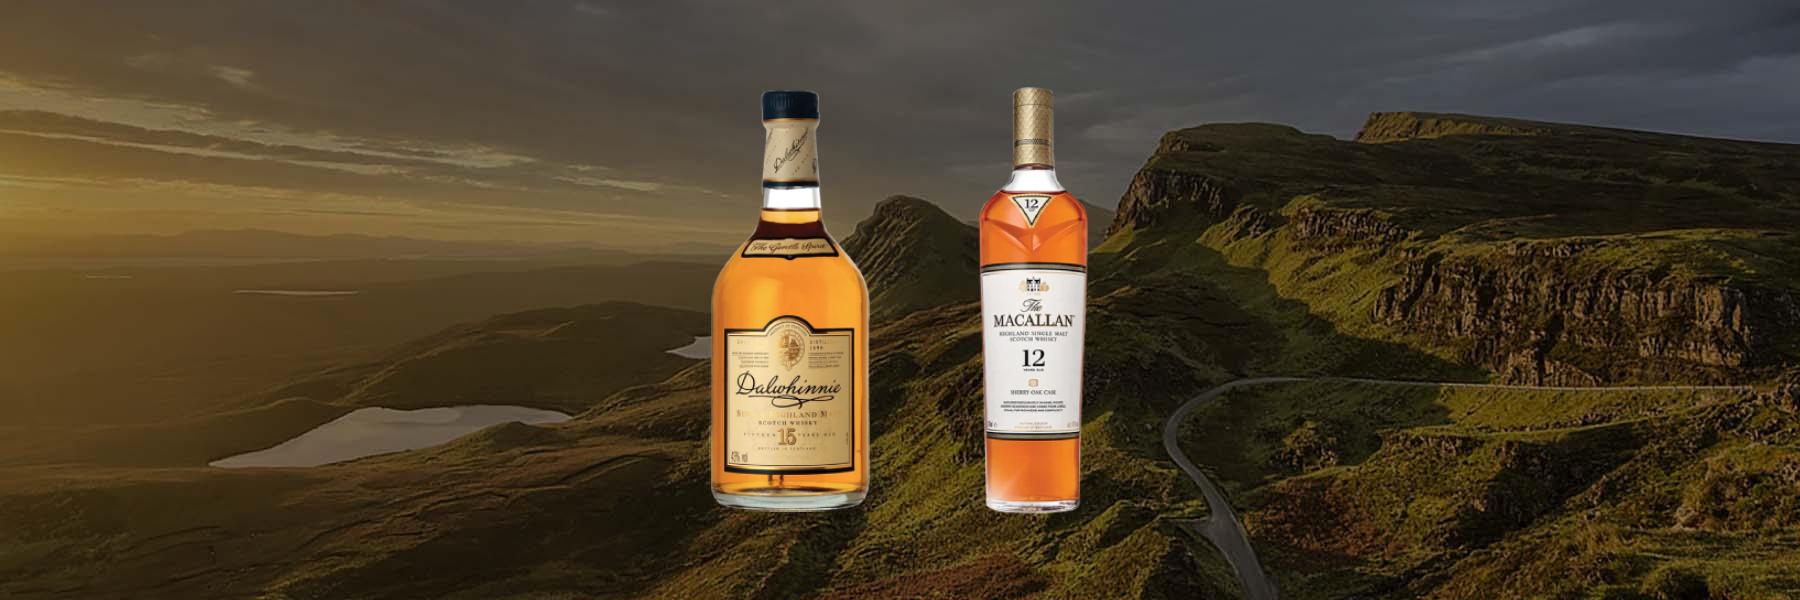 Dalwhinnie 15 vs. Macallan 12: An Iconic Face-Off